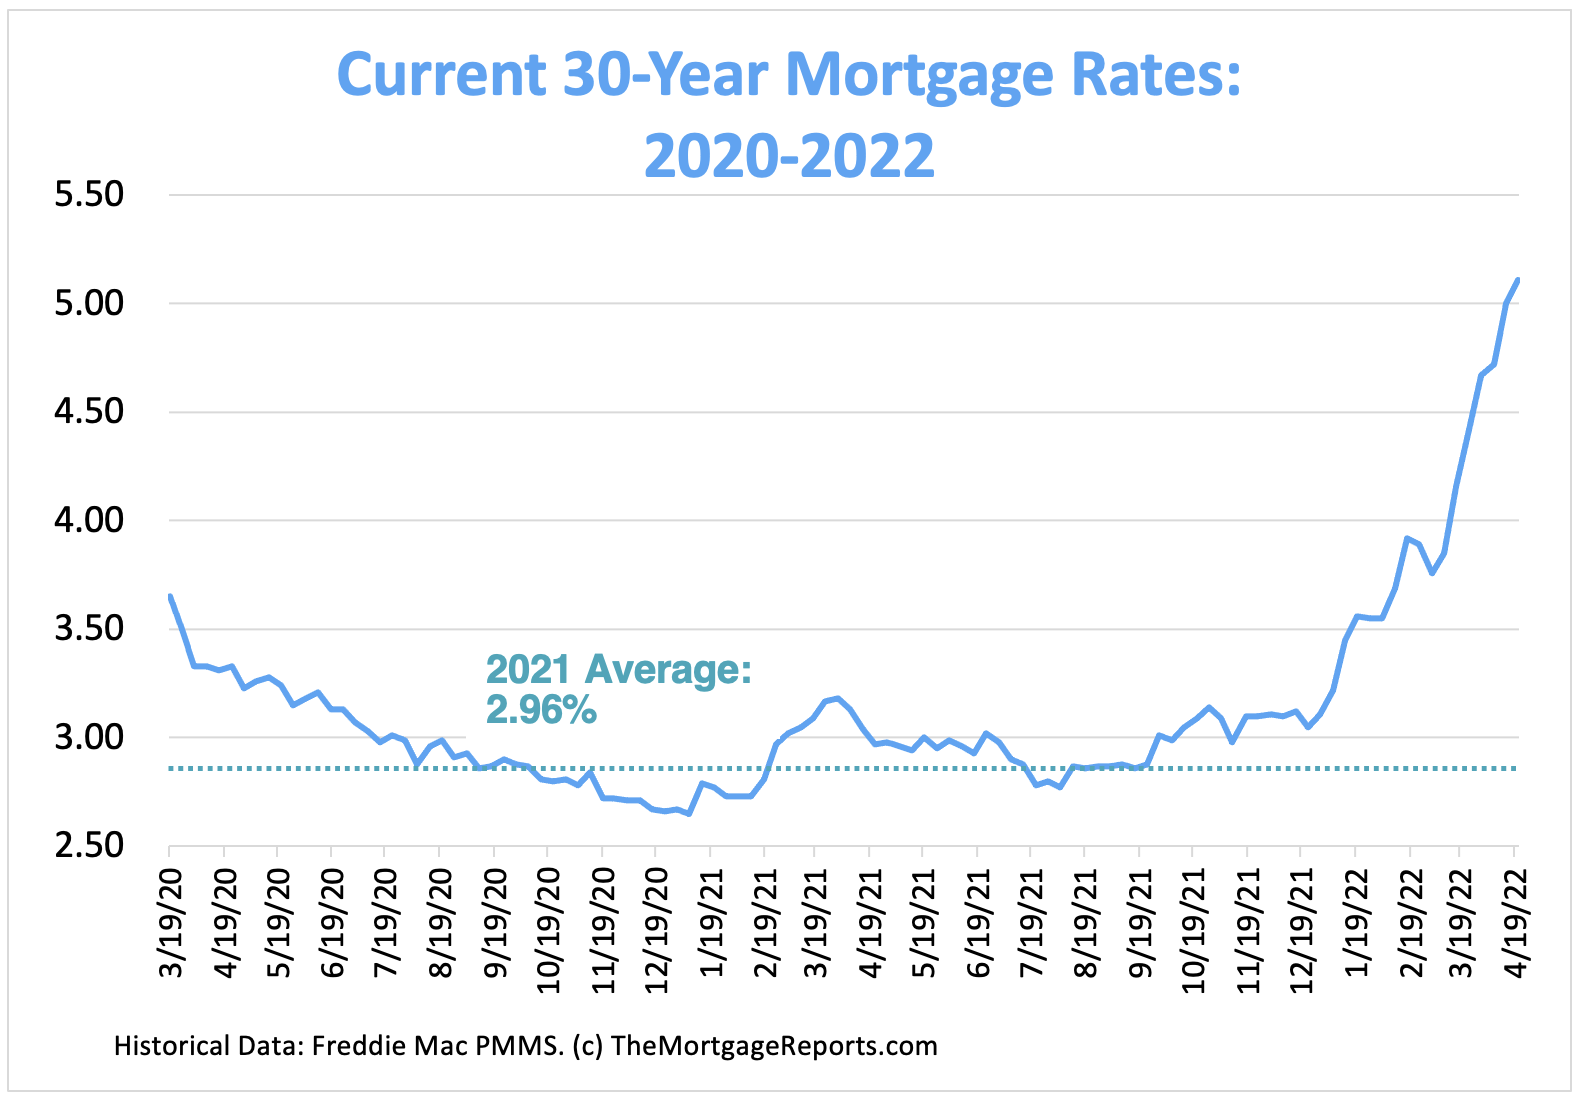 Current mortgage rates chart shows average 30-year fixed rates from March 2020 to April 2022. Rates rose quickly between March and April of 2022.